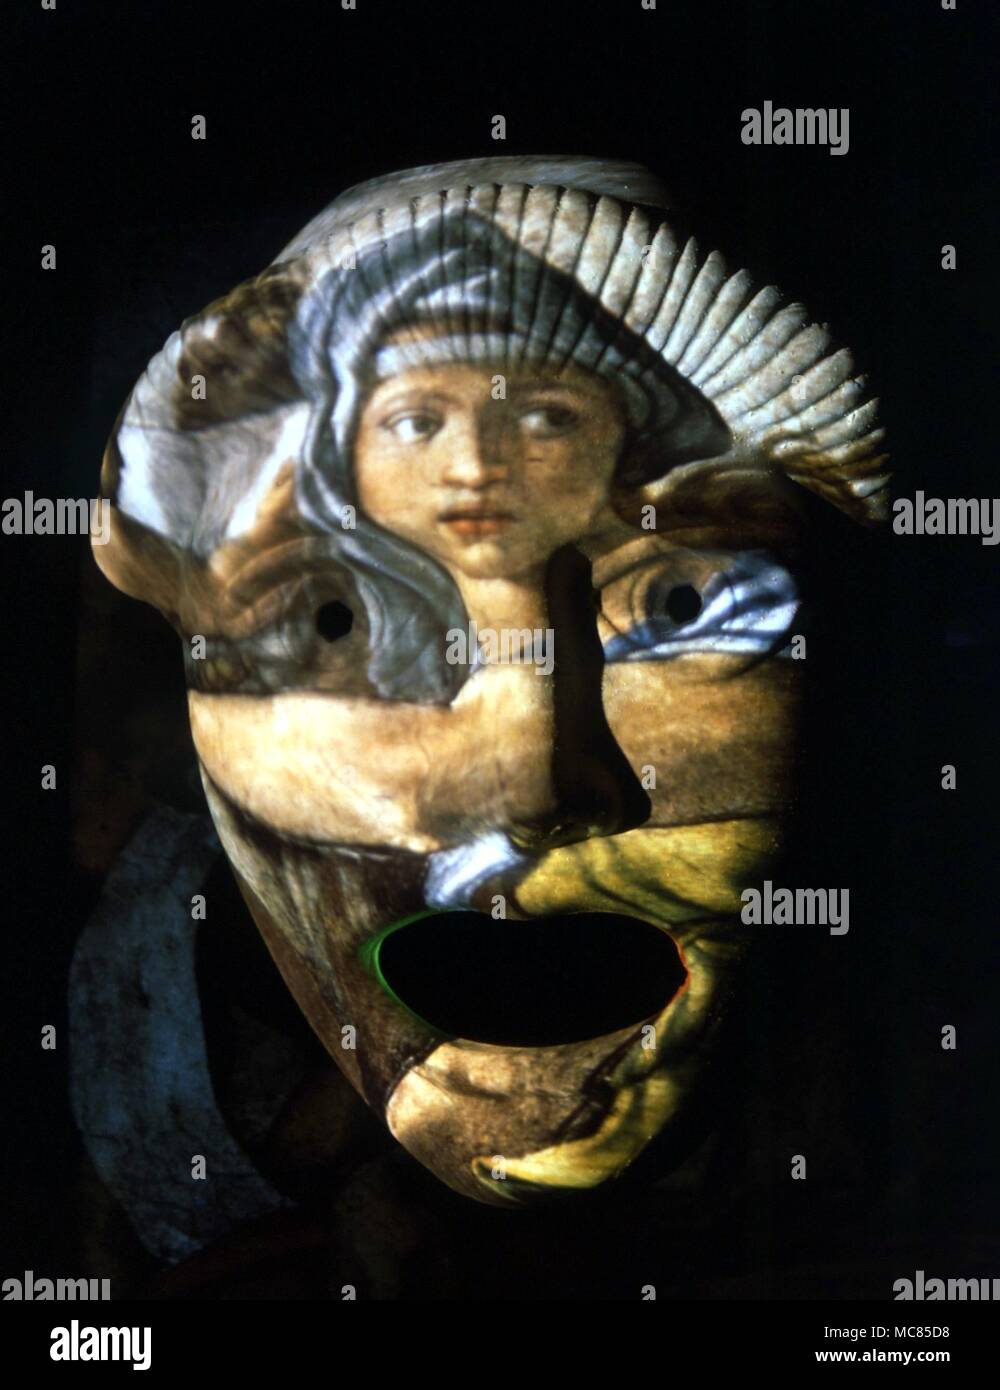 A symbol of the ancient Greek initiation mysteries - an image of the Oracle at Delphi, projected on to a mask - then regarded as symbol of the earthly persona, or personality, which was a tool to initiation. Stock Photo